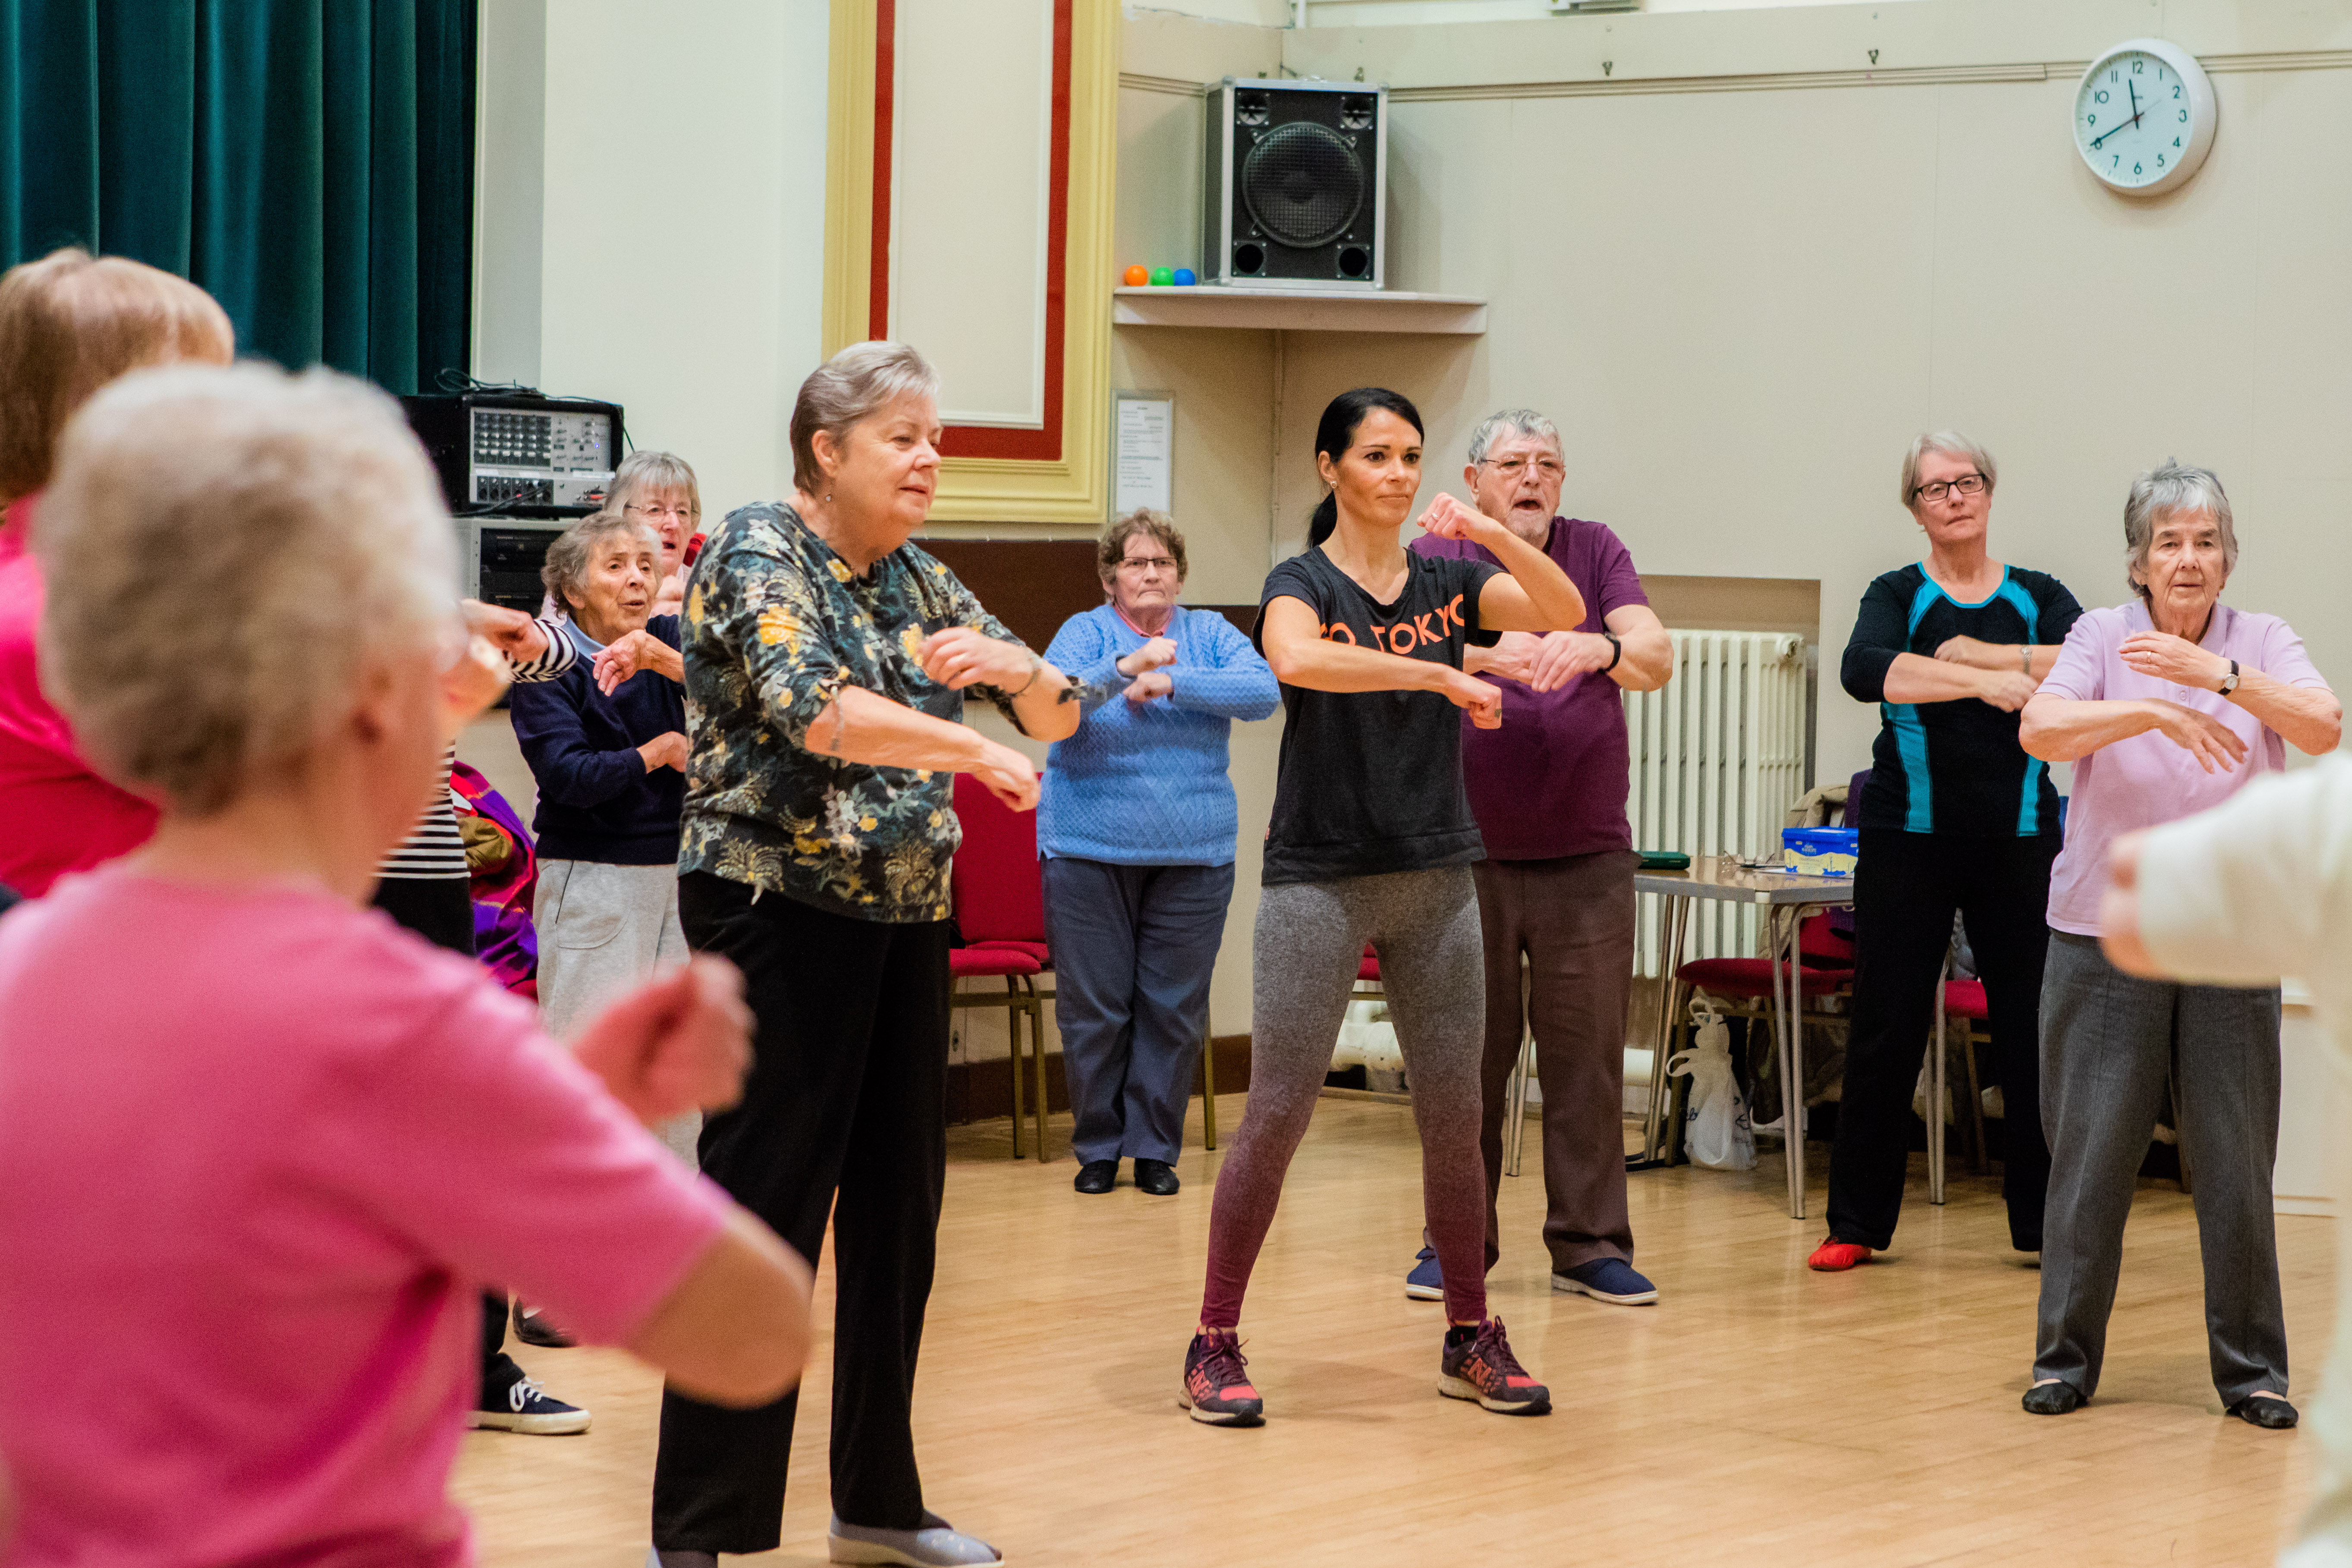 Exercise for life classes are for anyone, any age!